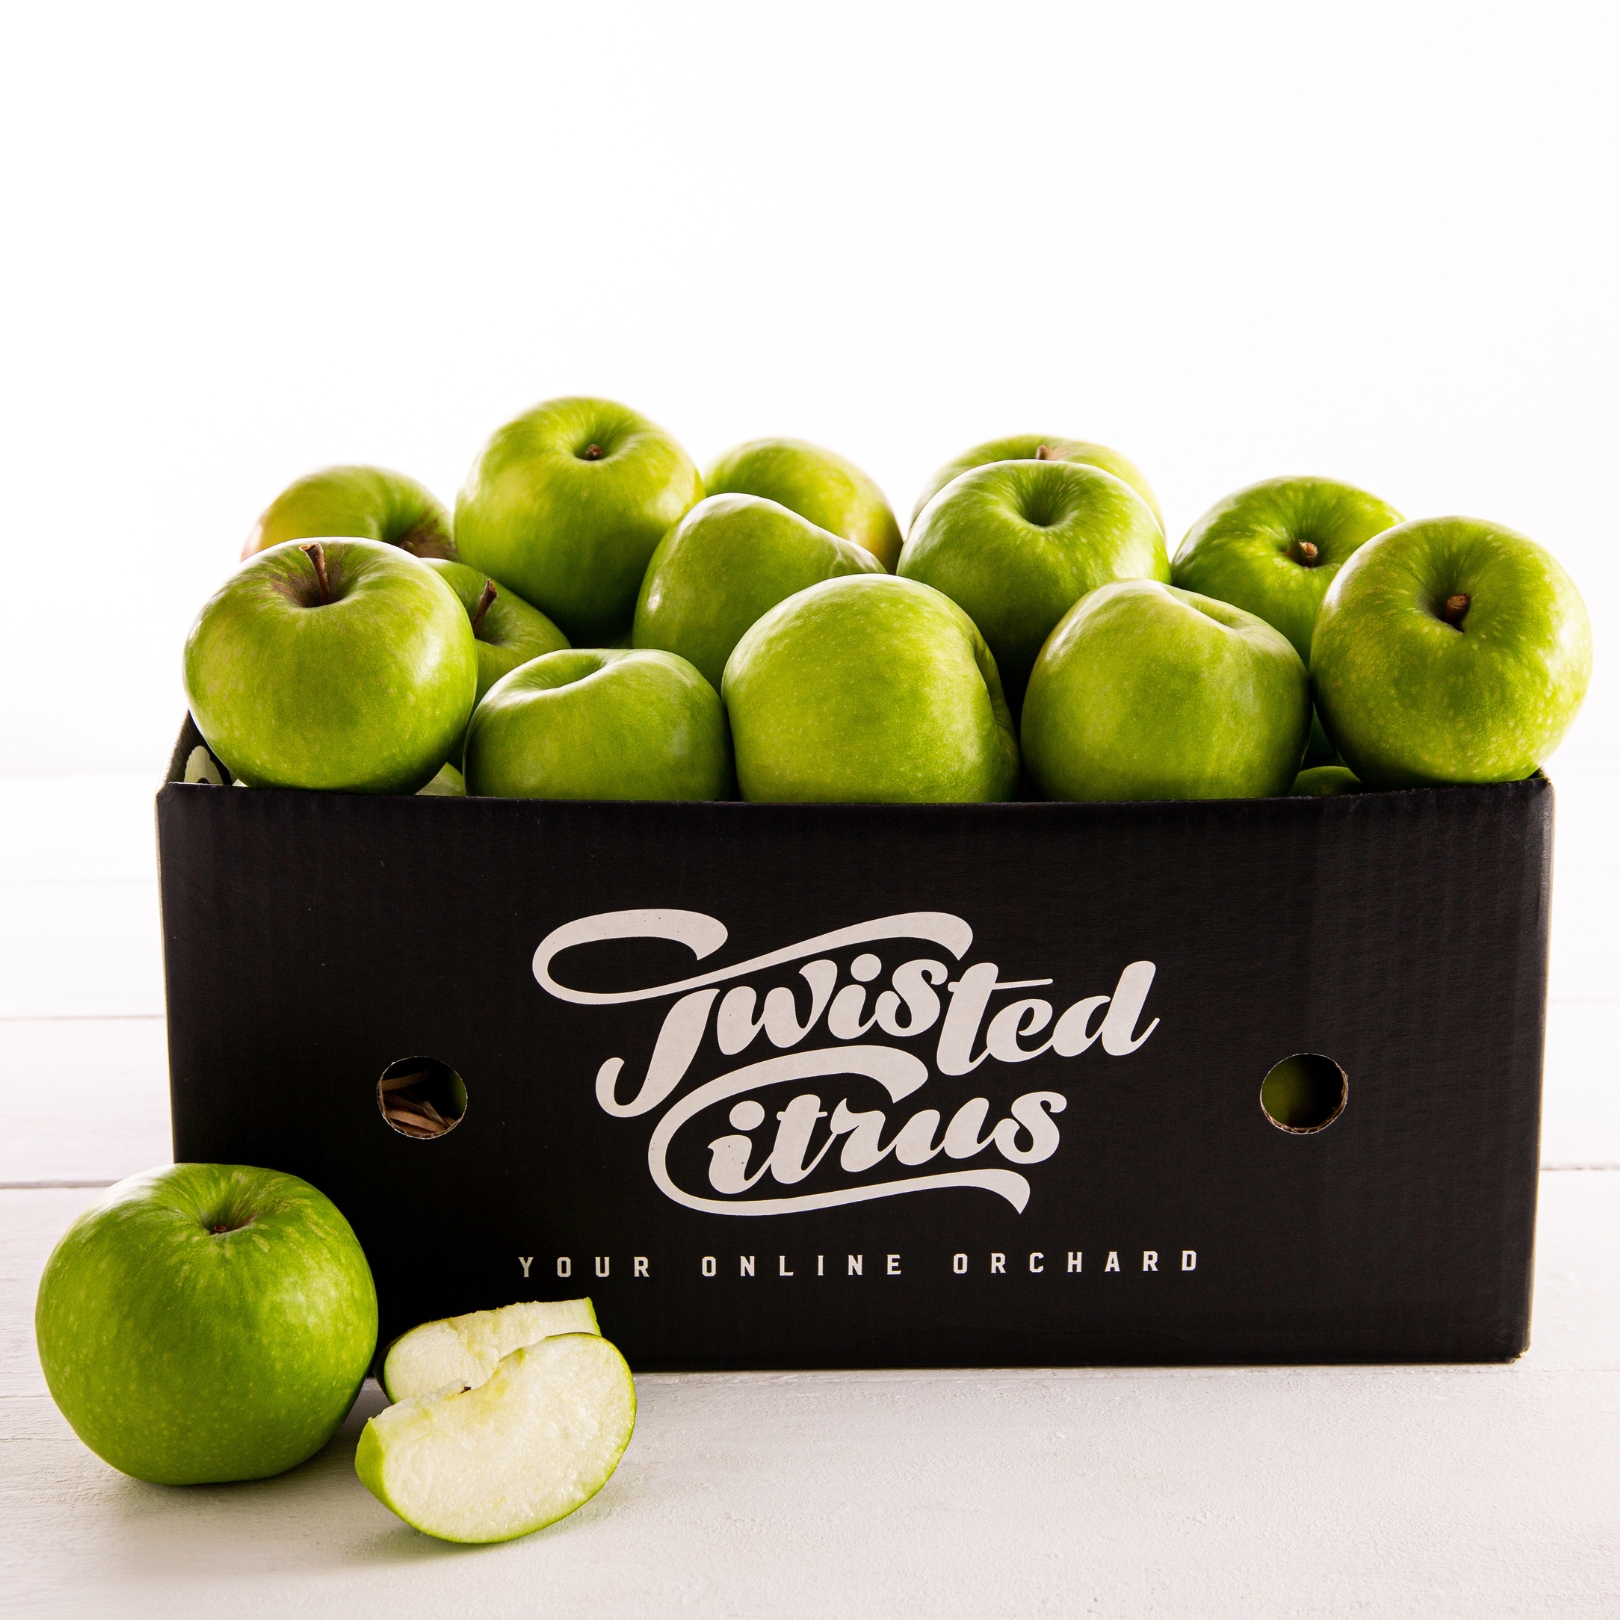 Buy Apples - Granny Smith Online NZ - Twisted Citrus